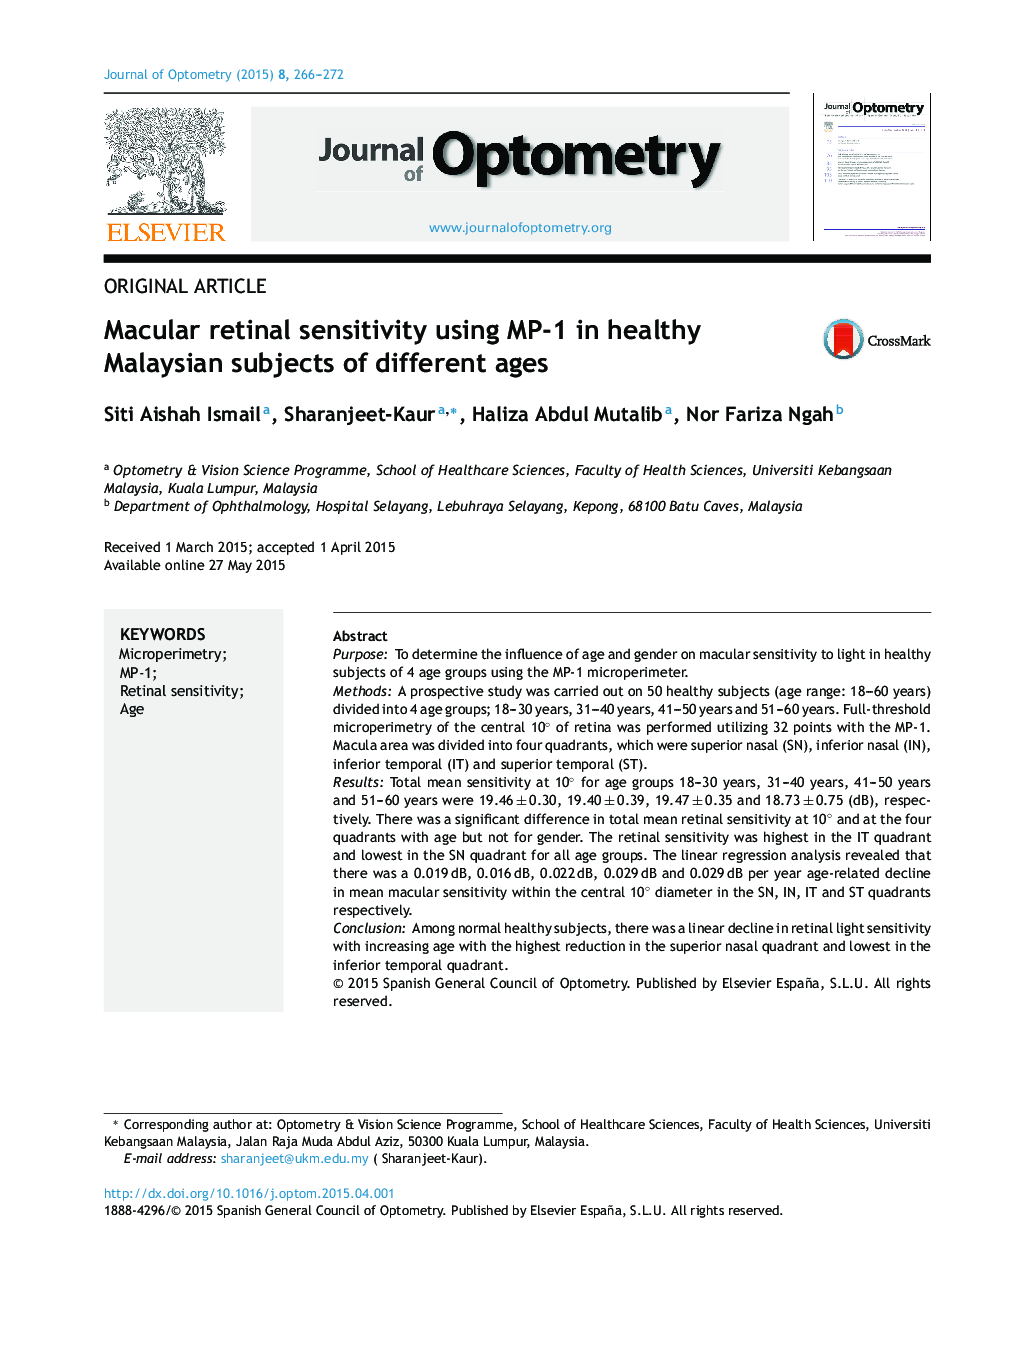 Macular retinal sensitivity using MP-1 in healthy Malaysian subjects of different ages